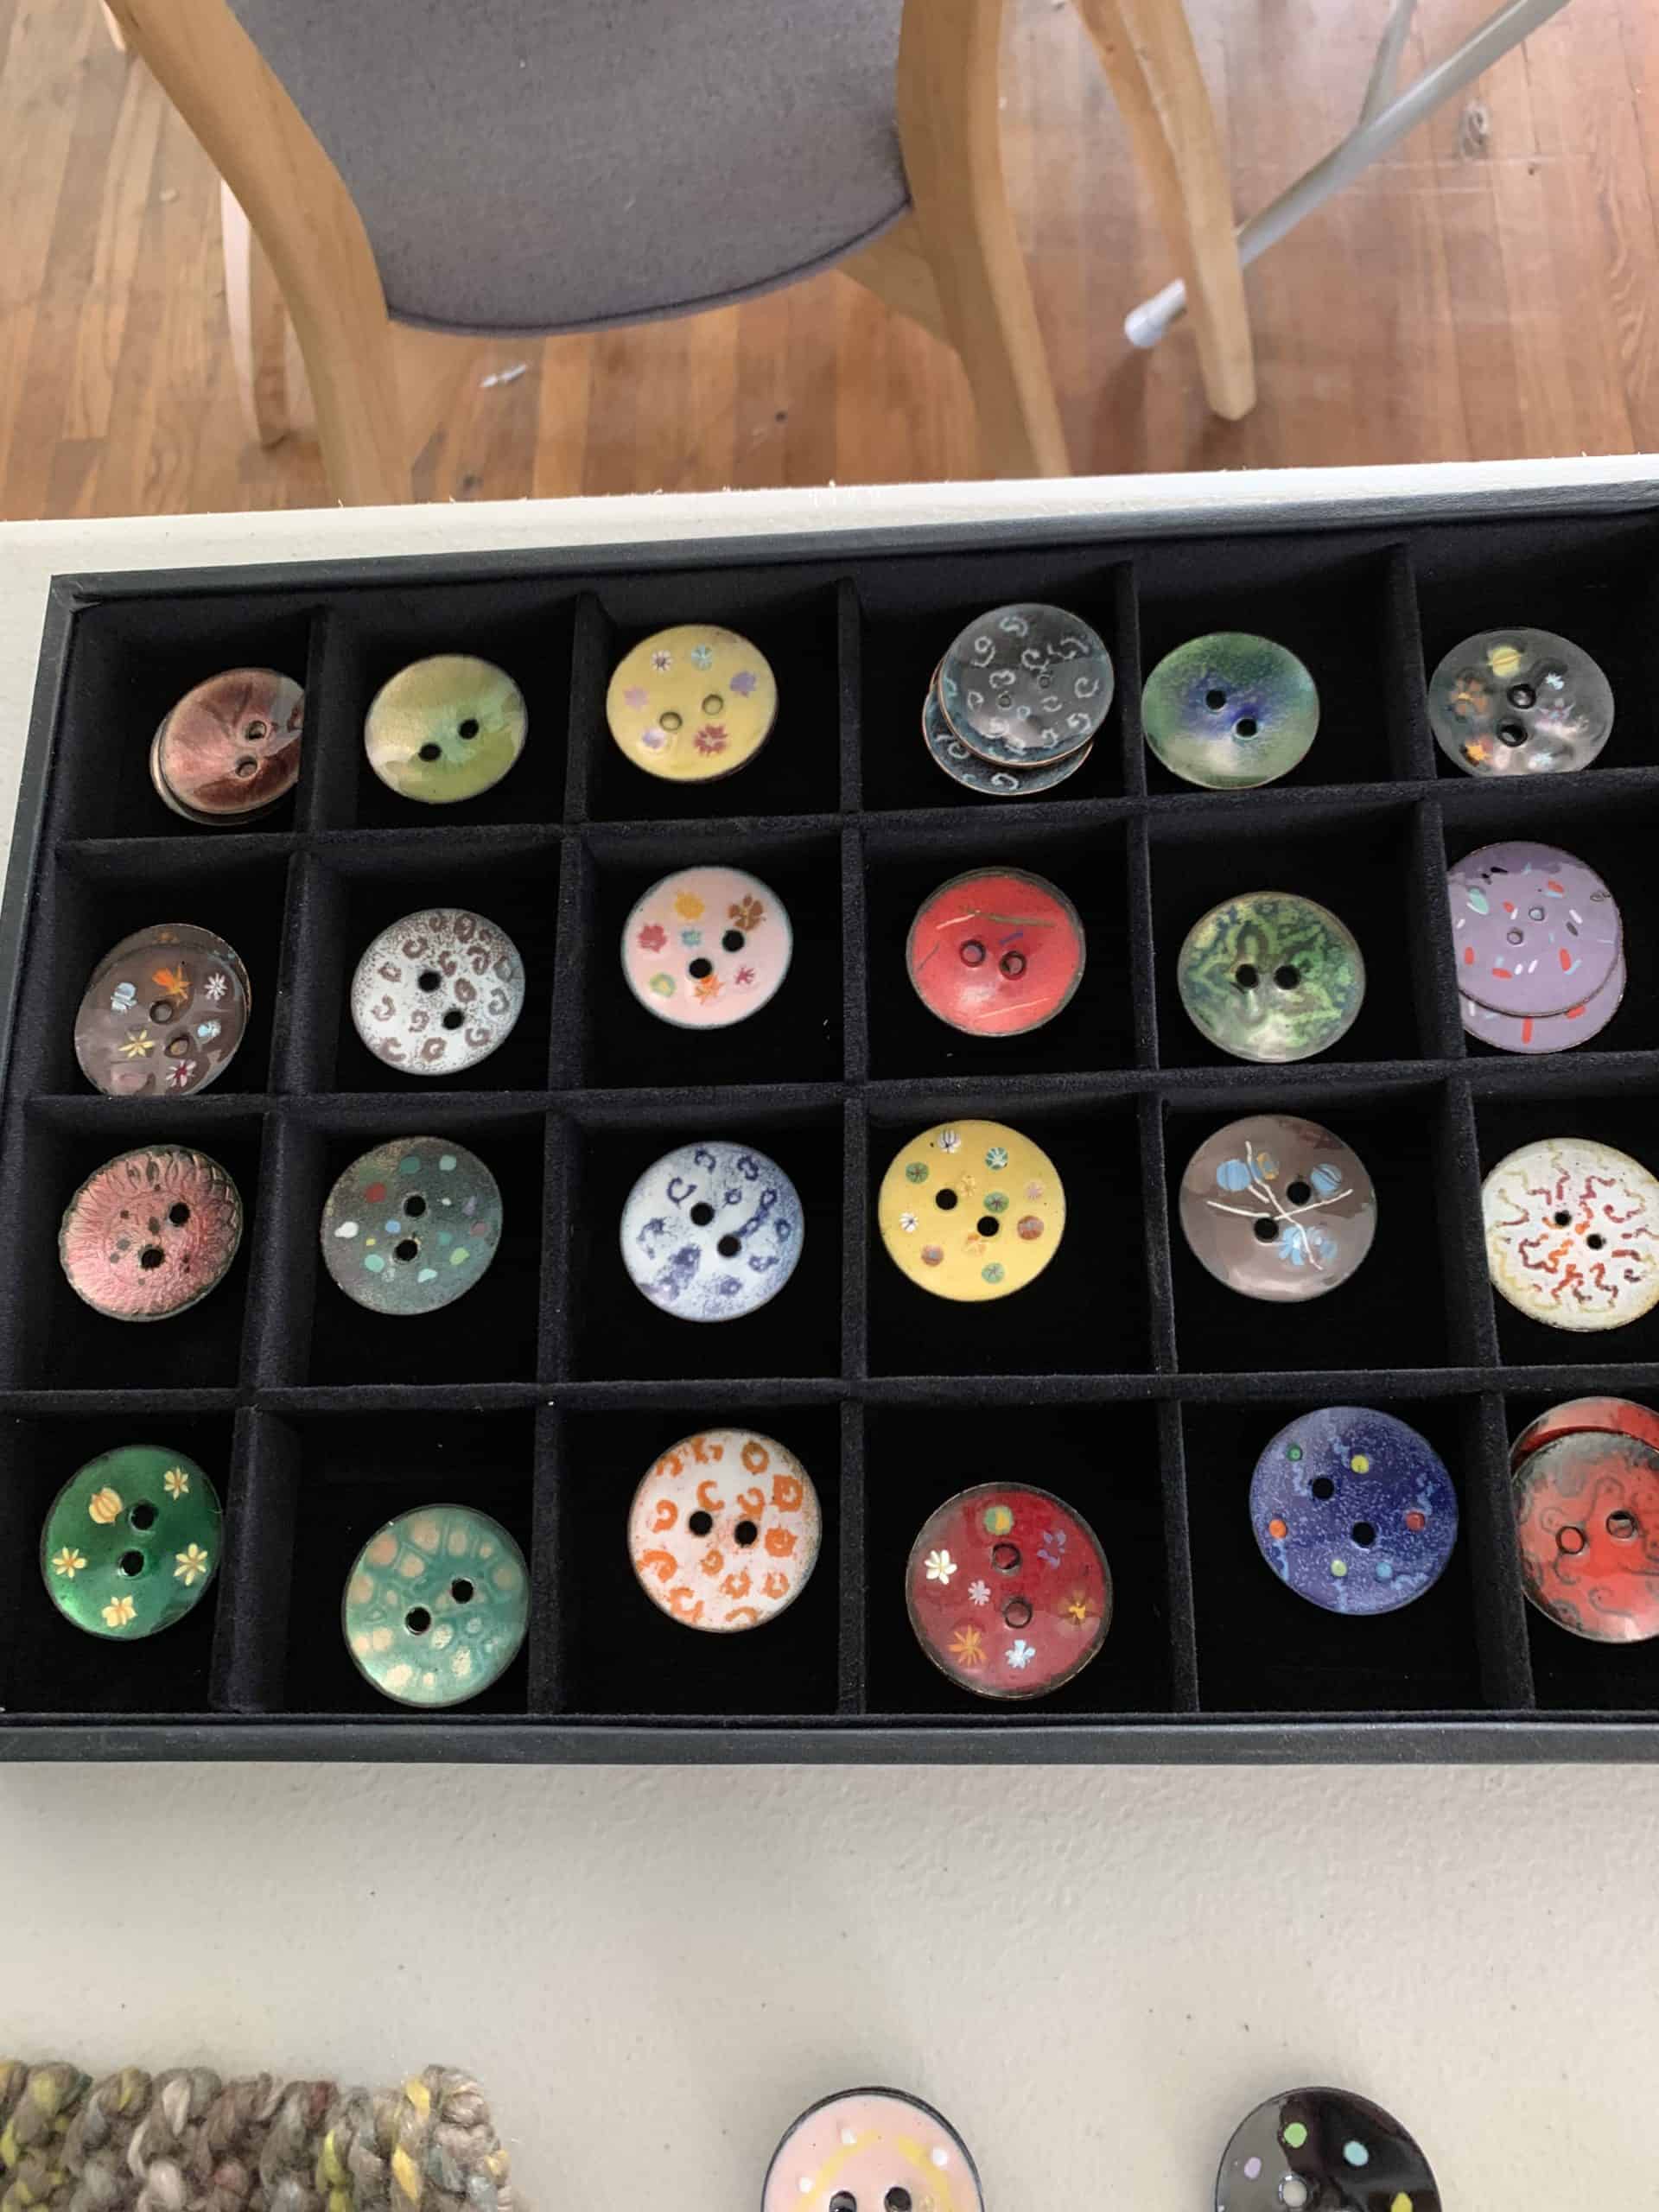 A box of colorful buttons.